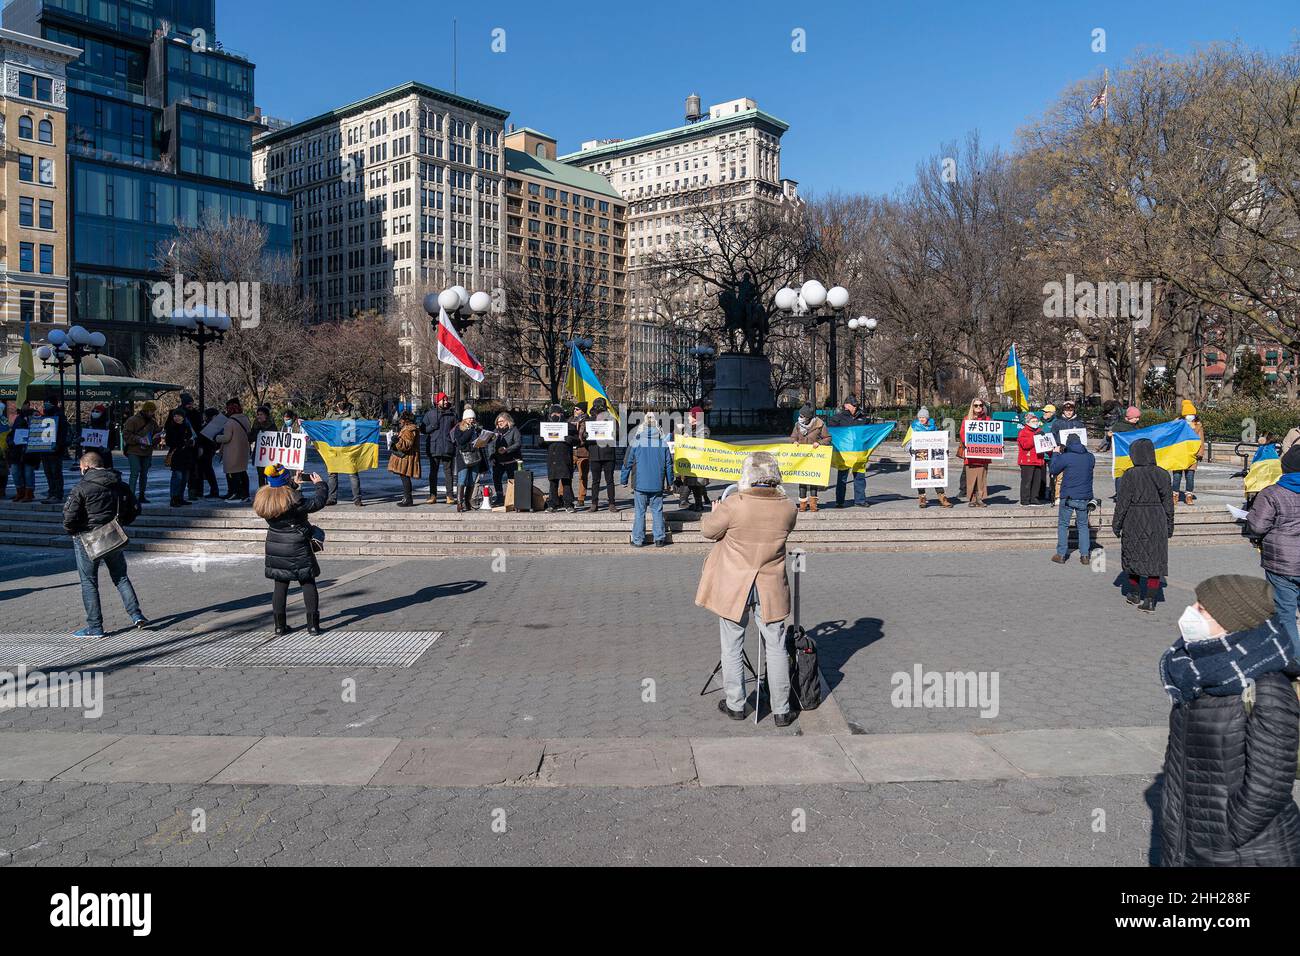 New York, United States. 22nd Jan, 2022. Protesters hold a Stand with Ukraine rally against Russian aggression on Union Square. Protesters held posters accusing Russia of crimes against Ukraine. They were also holding flags by Belarus and Georgia, symbolizing Russian interference with those countries. (Photo by Lev Radin/Pacific Press) Credit: Pacific Press Media Production Corp./Alamy Live News Stock Photo